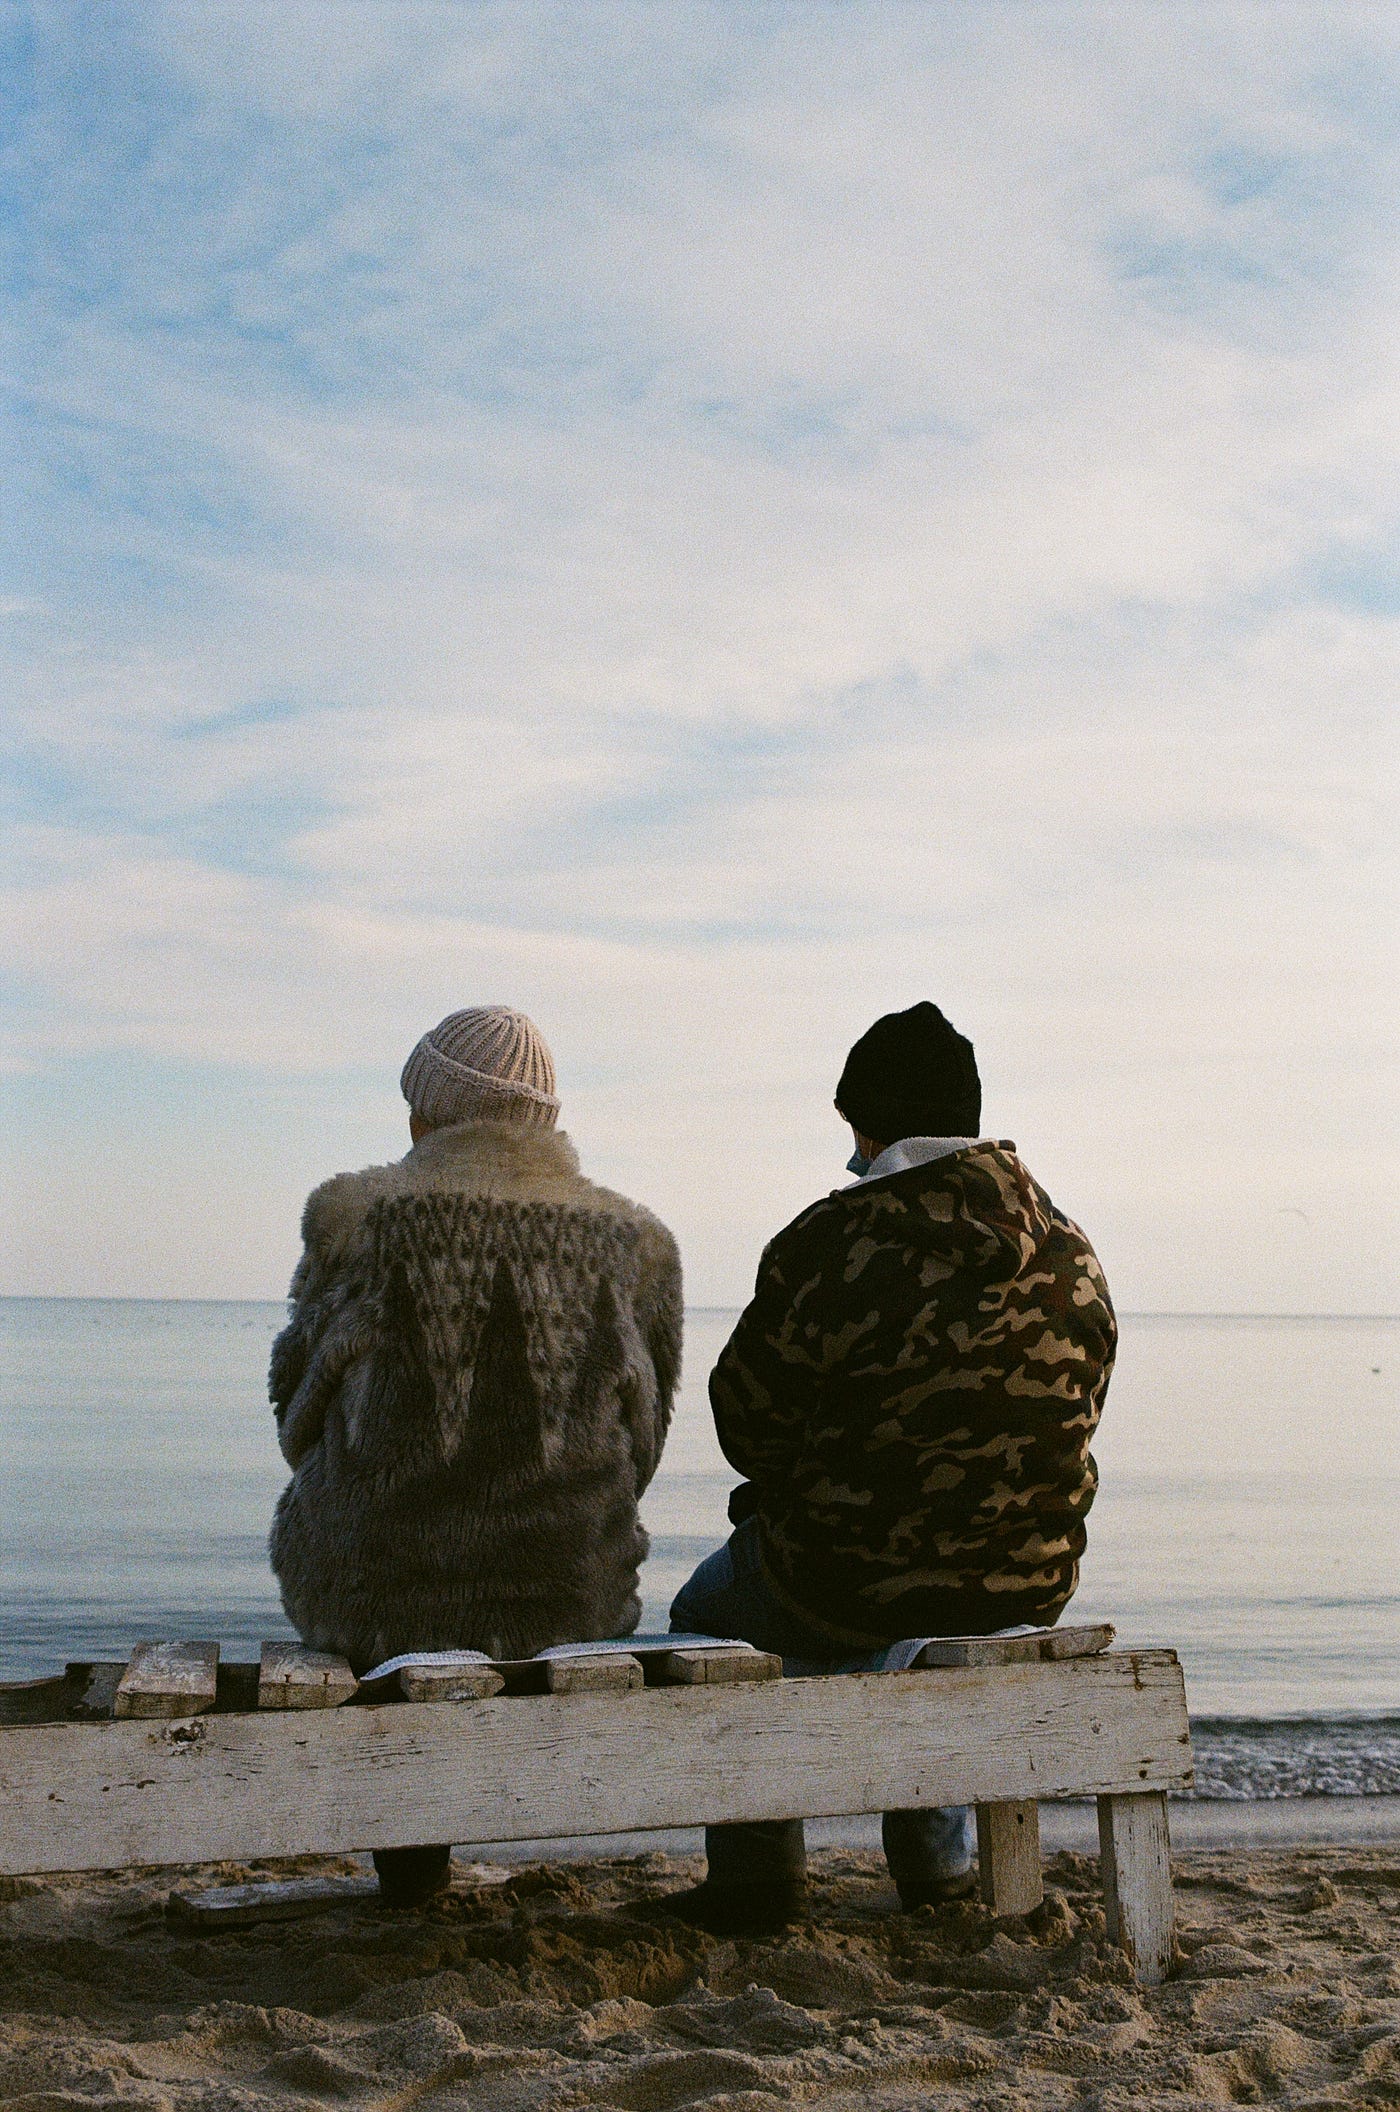 An older couple, dressed for winter with caps and patterned winter coats, sits facing away from us. They gaze over what looks like fog or clouds.